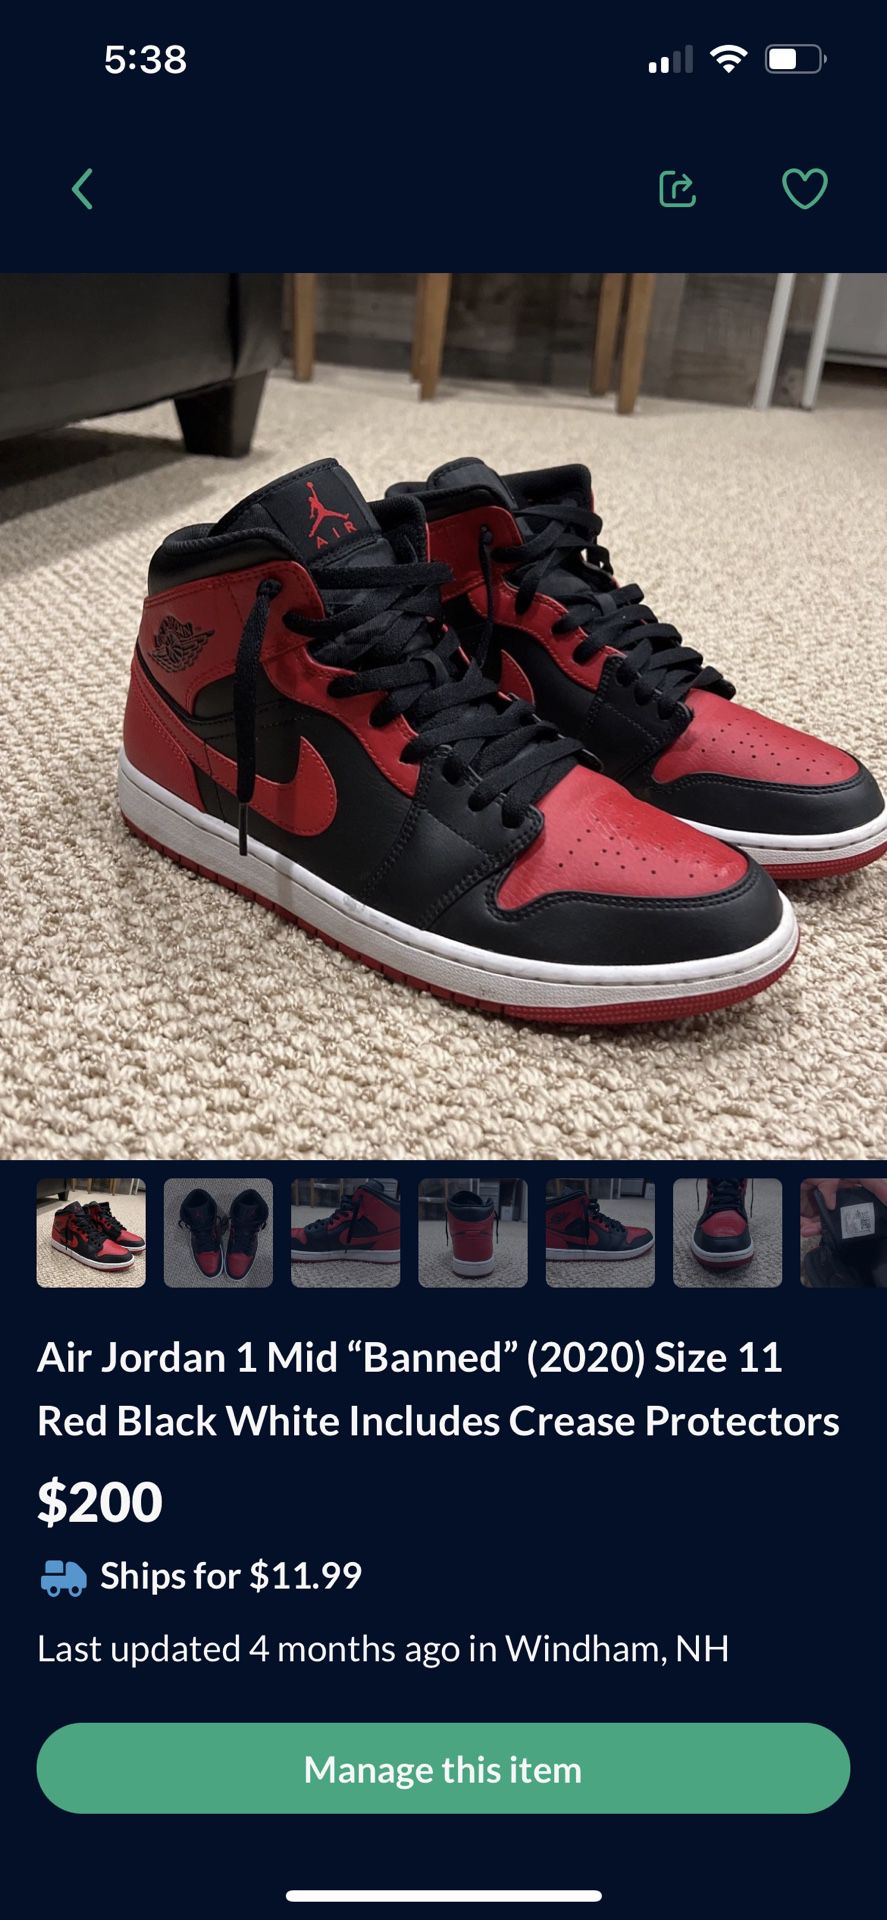 Air Jordan 1 Mid “Banned” (2020) Size 11 Red Black White Includes Crease Protectors